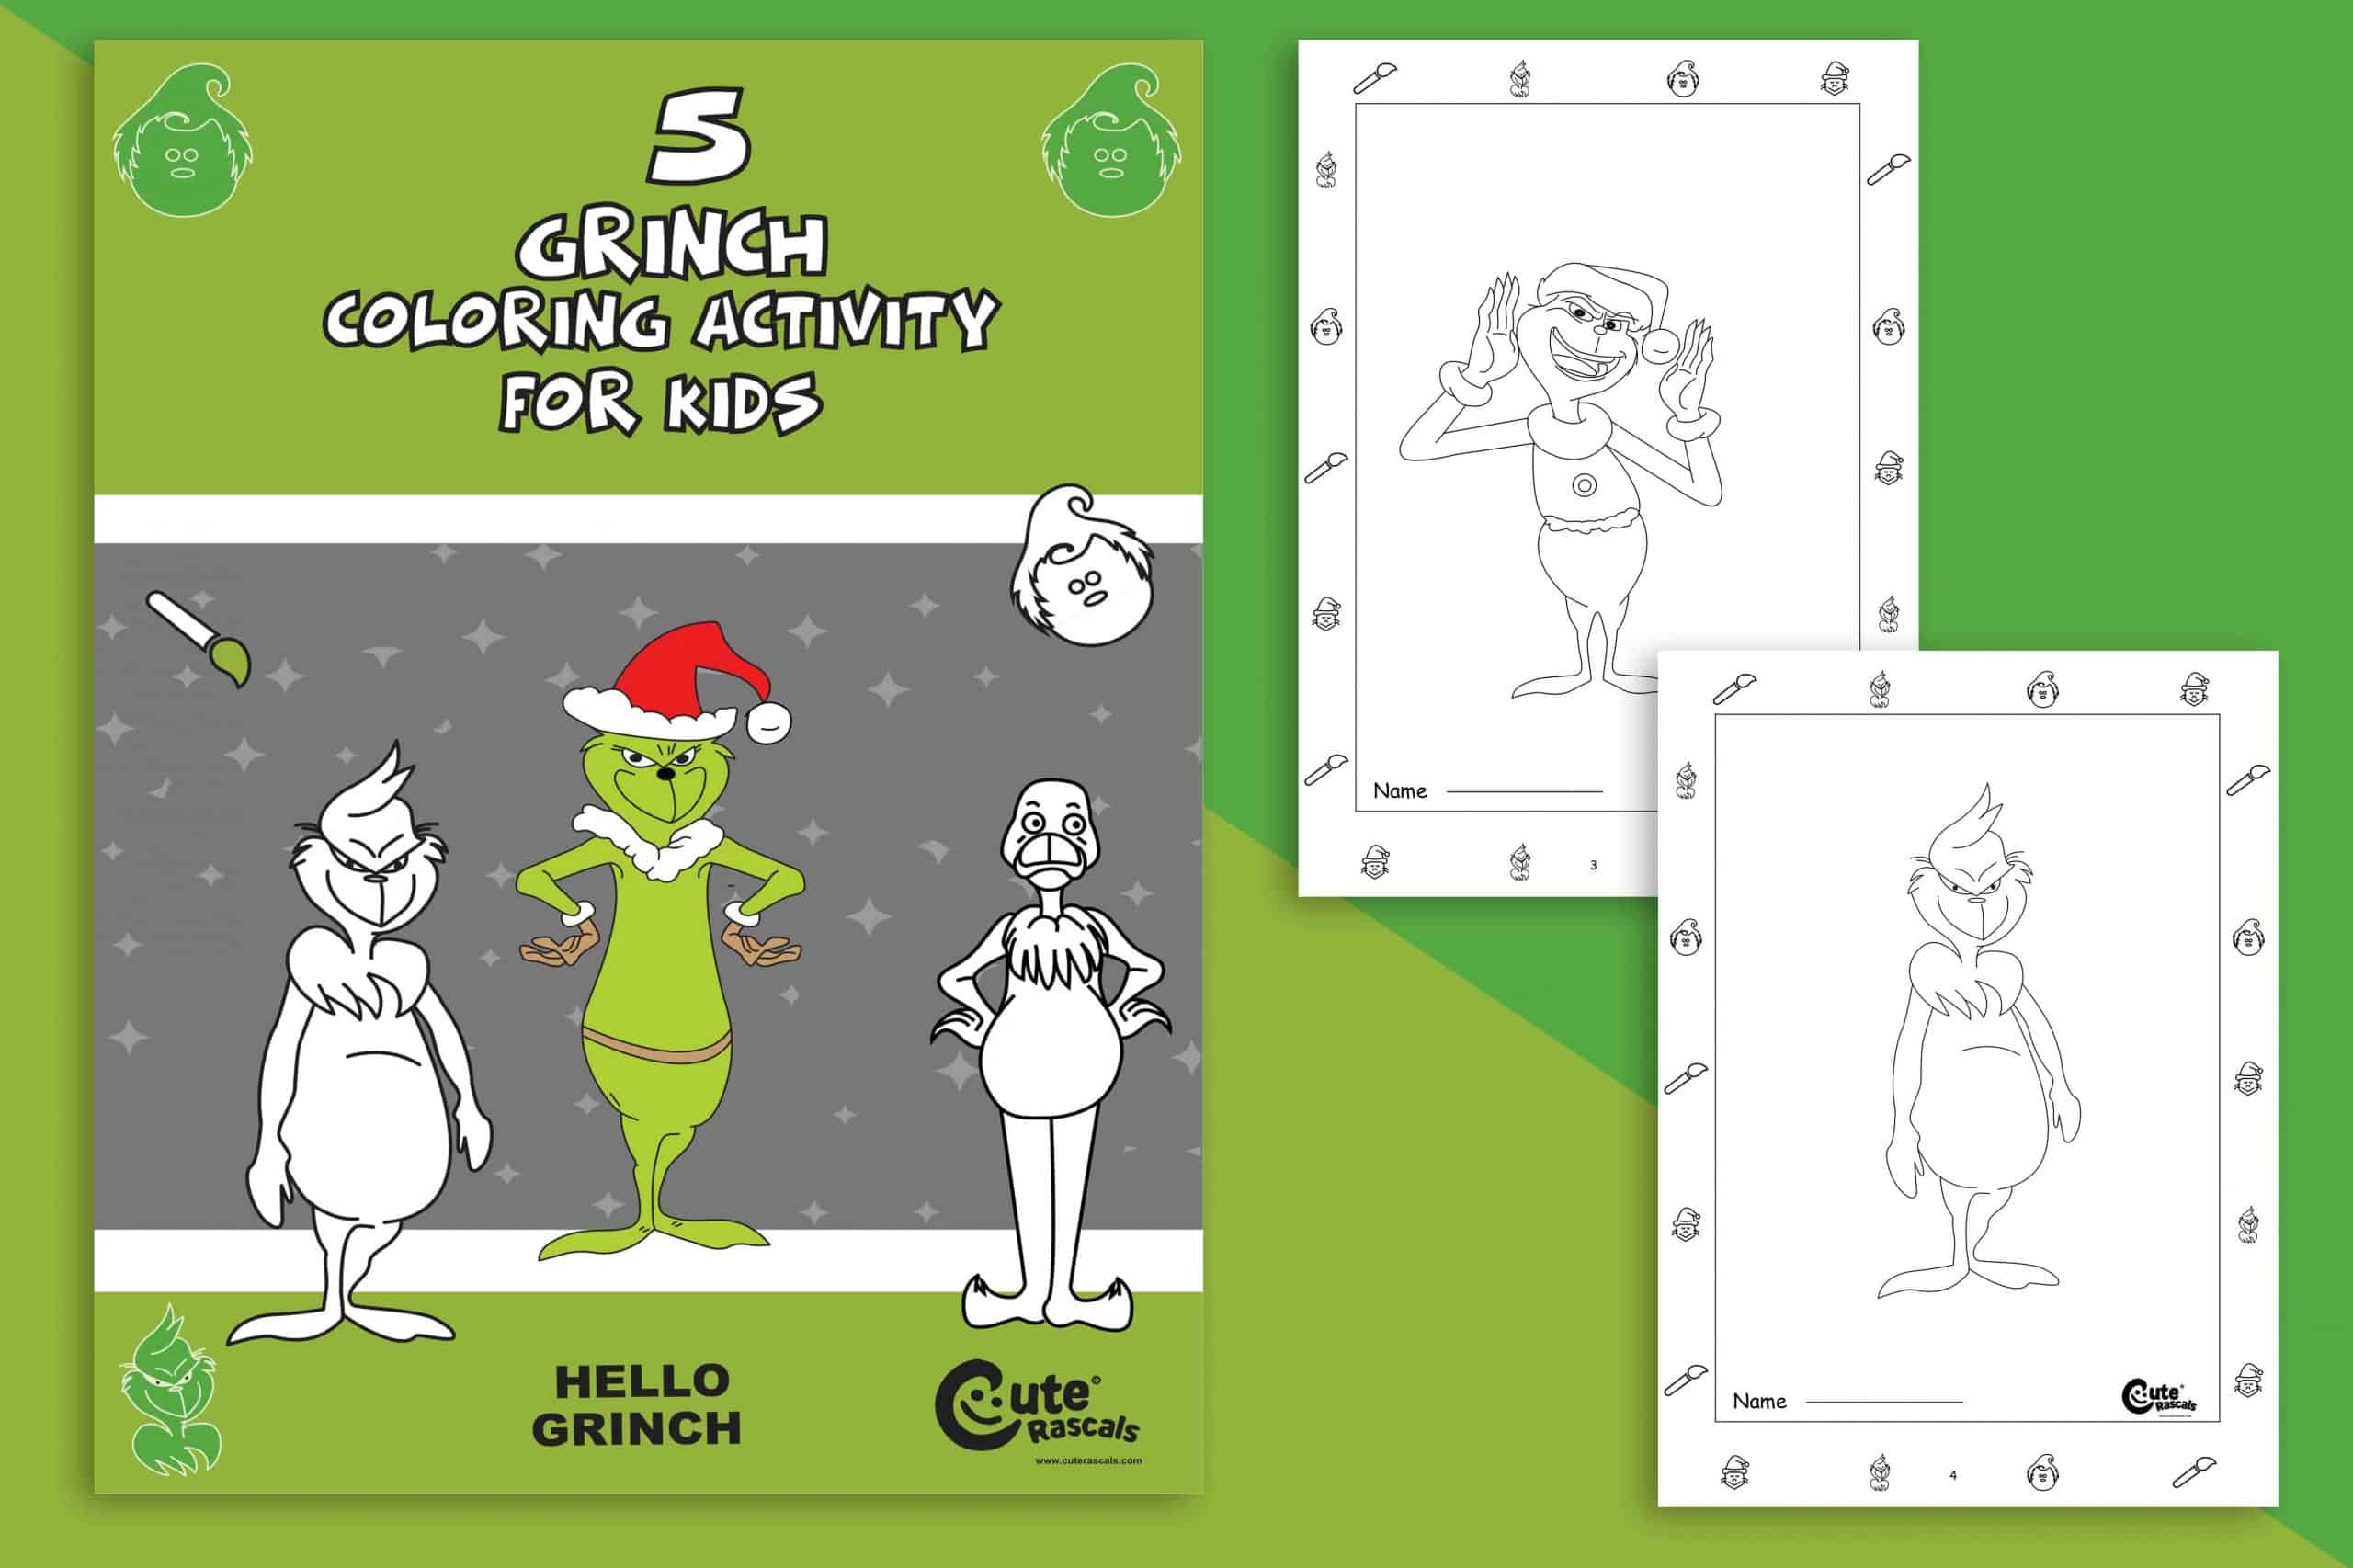 Grinch coloring pages fun christmas coloring pages for kids holidays